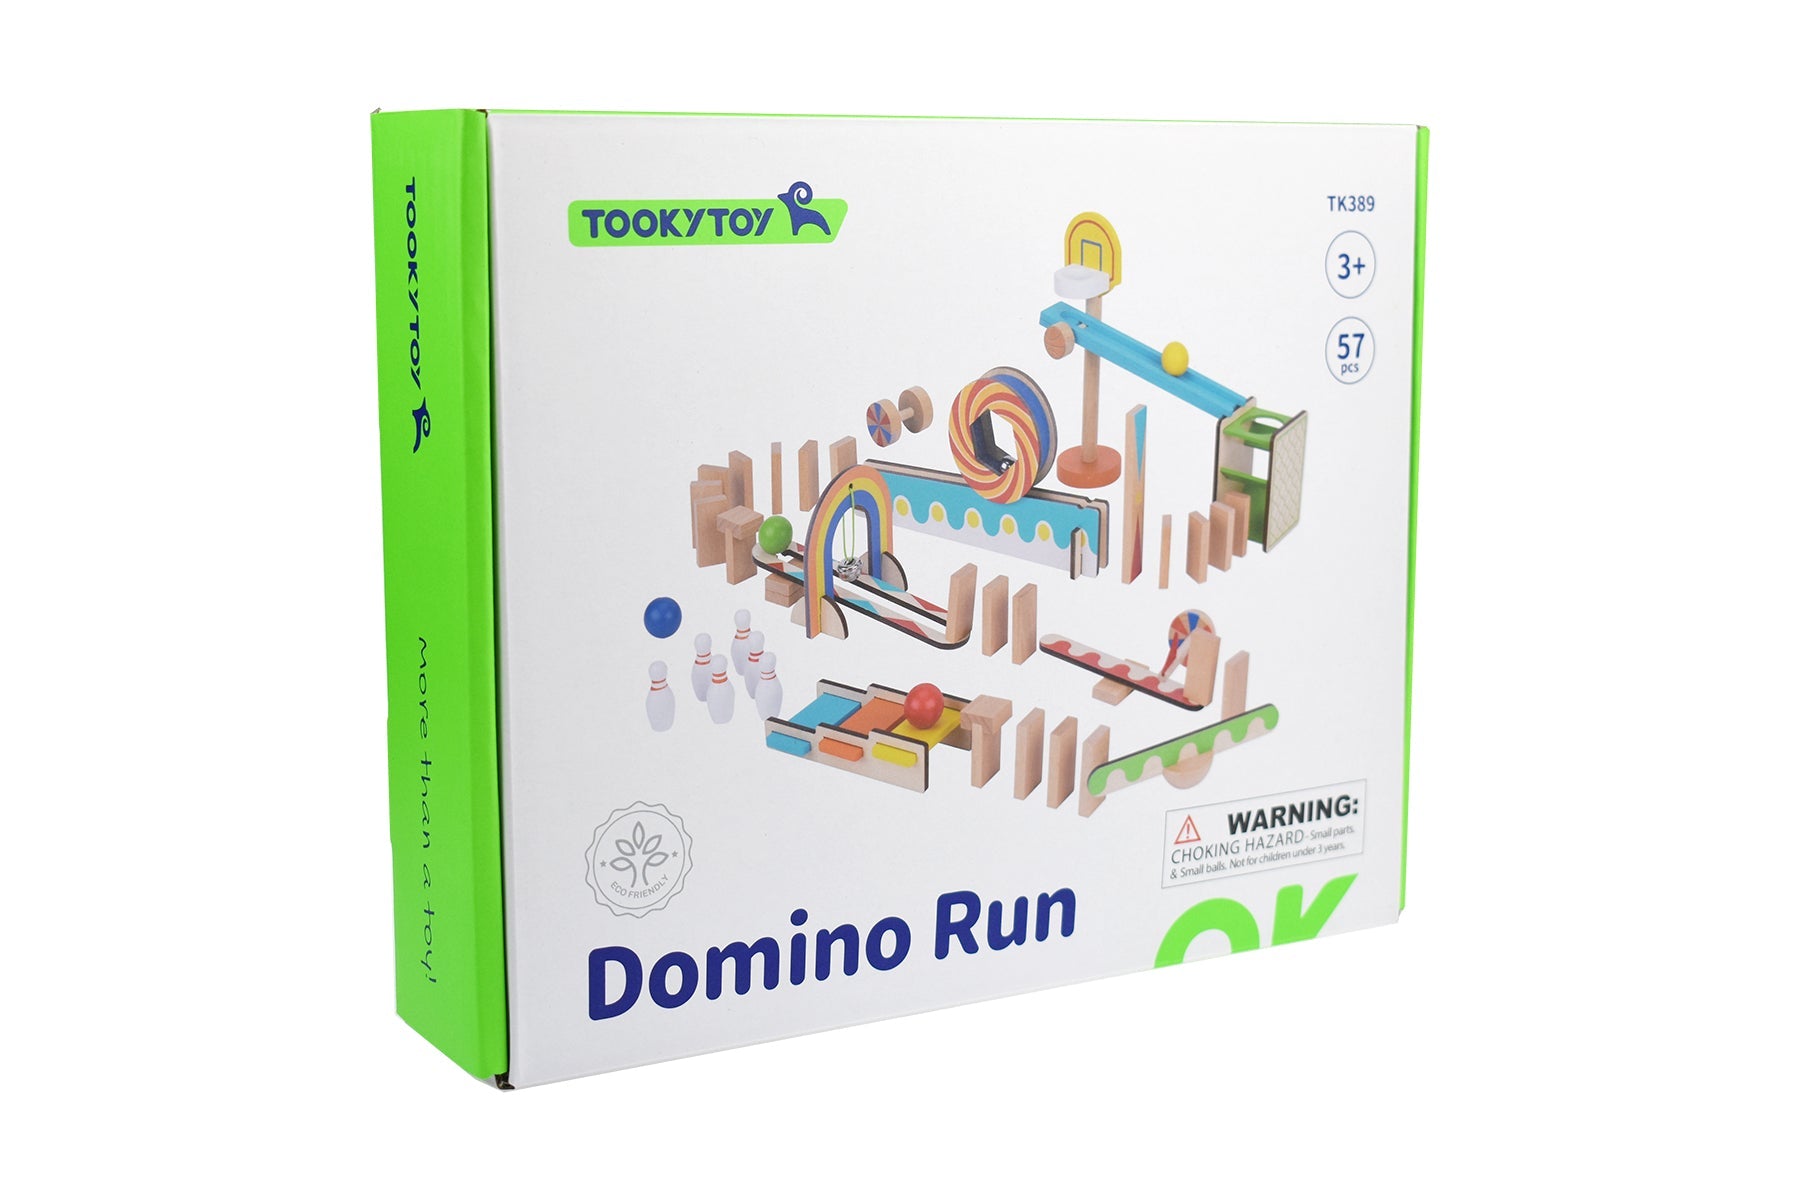 Build Endless Kinetic Fun with Tooky Toy Dominoes Run Building Set - Large